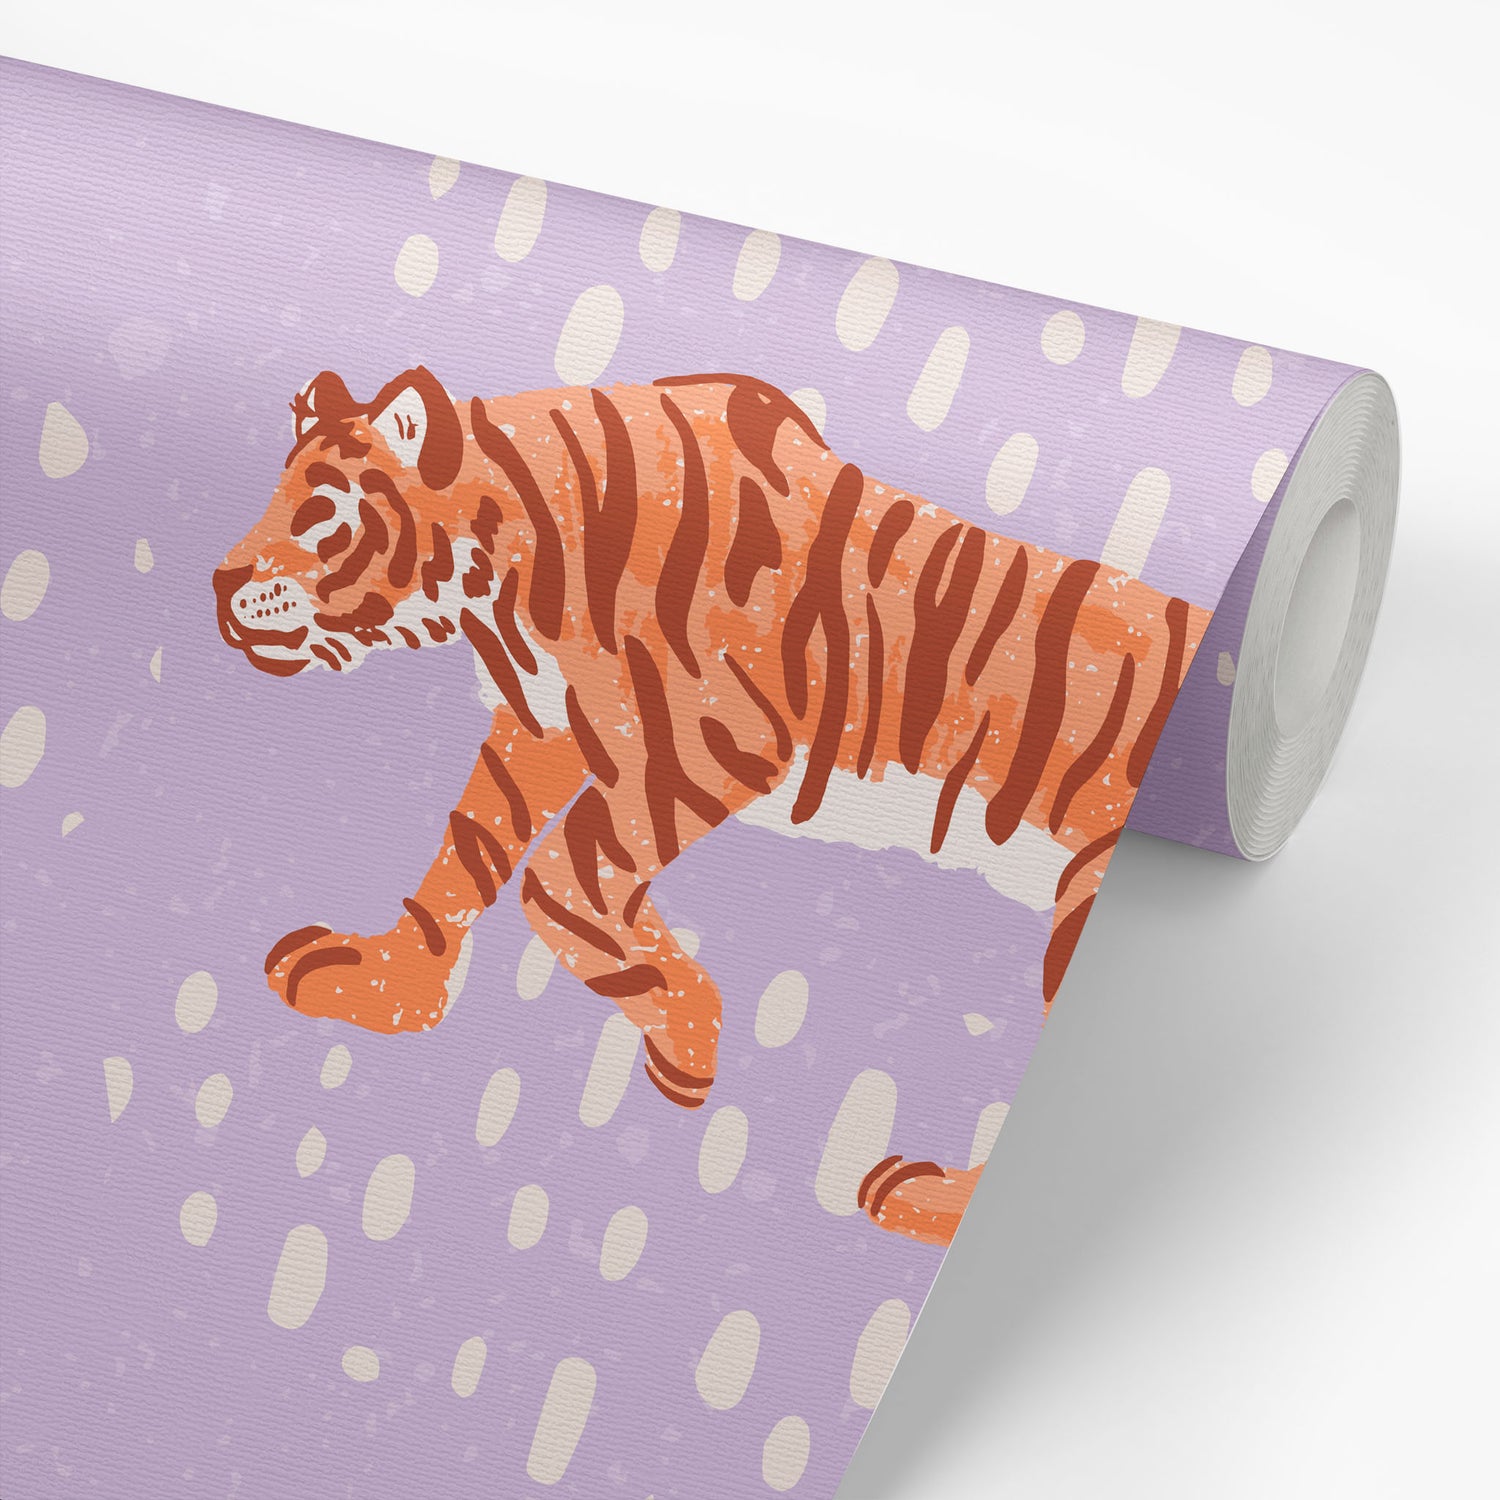 Wallpaper Roll of Tiger Meadow- Purple Wallpaper perfect for a nursery or playroom space.